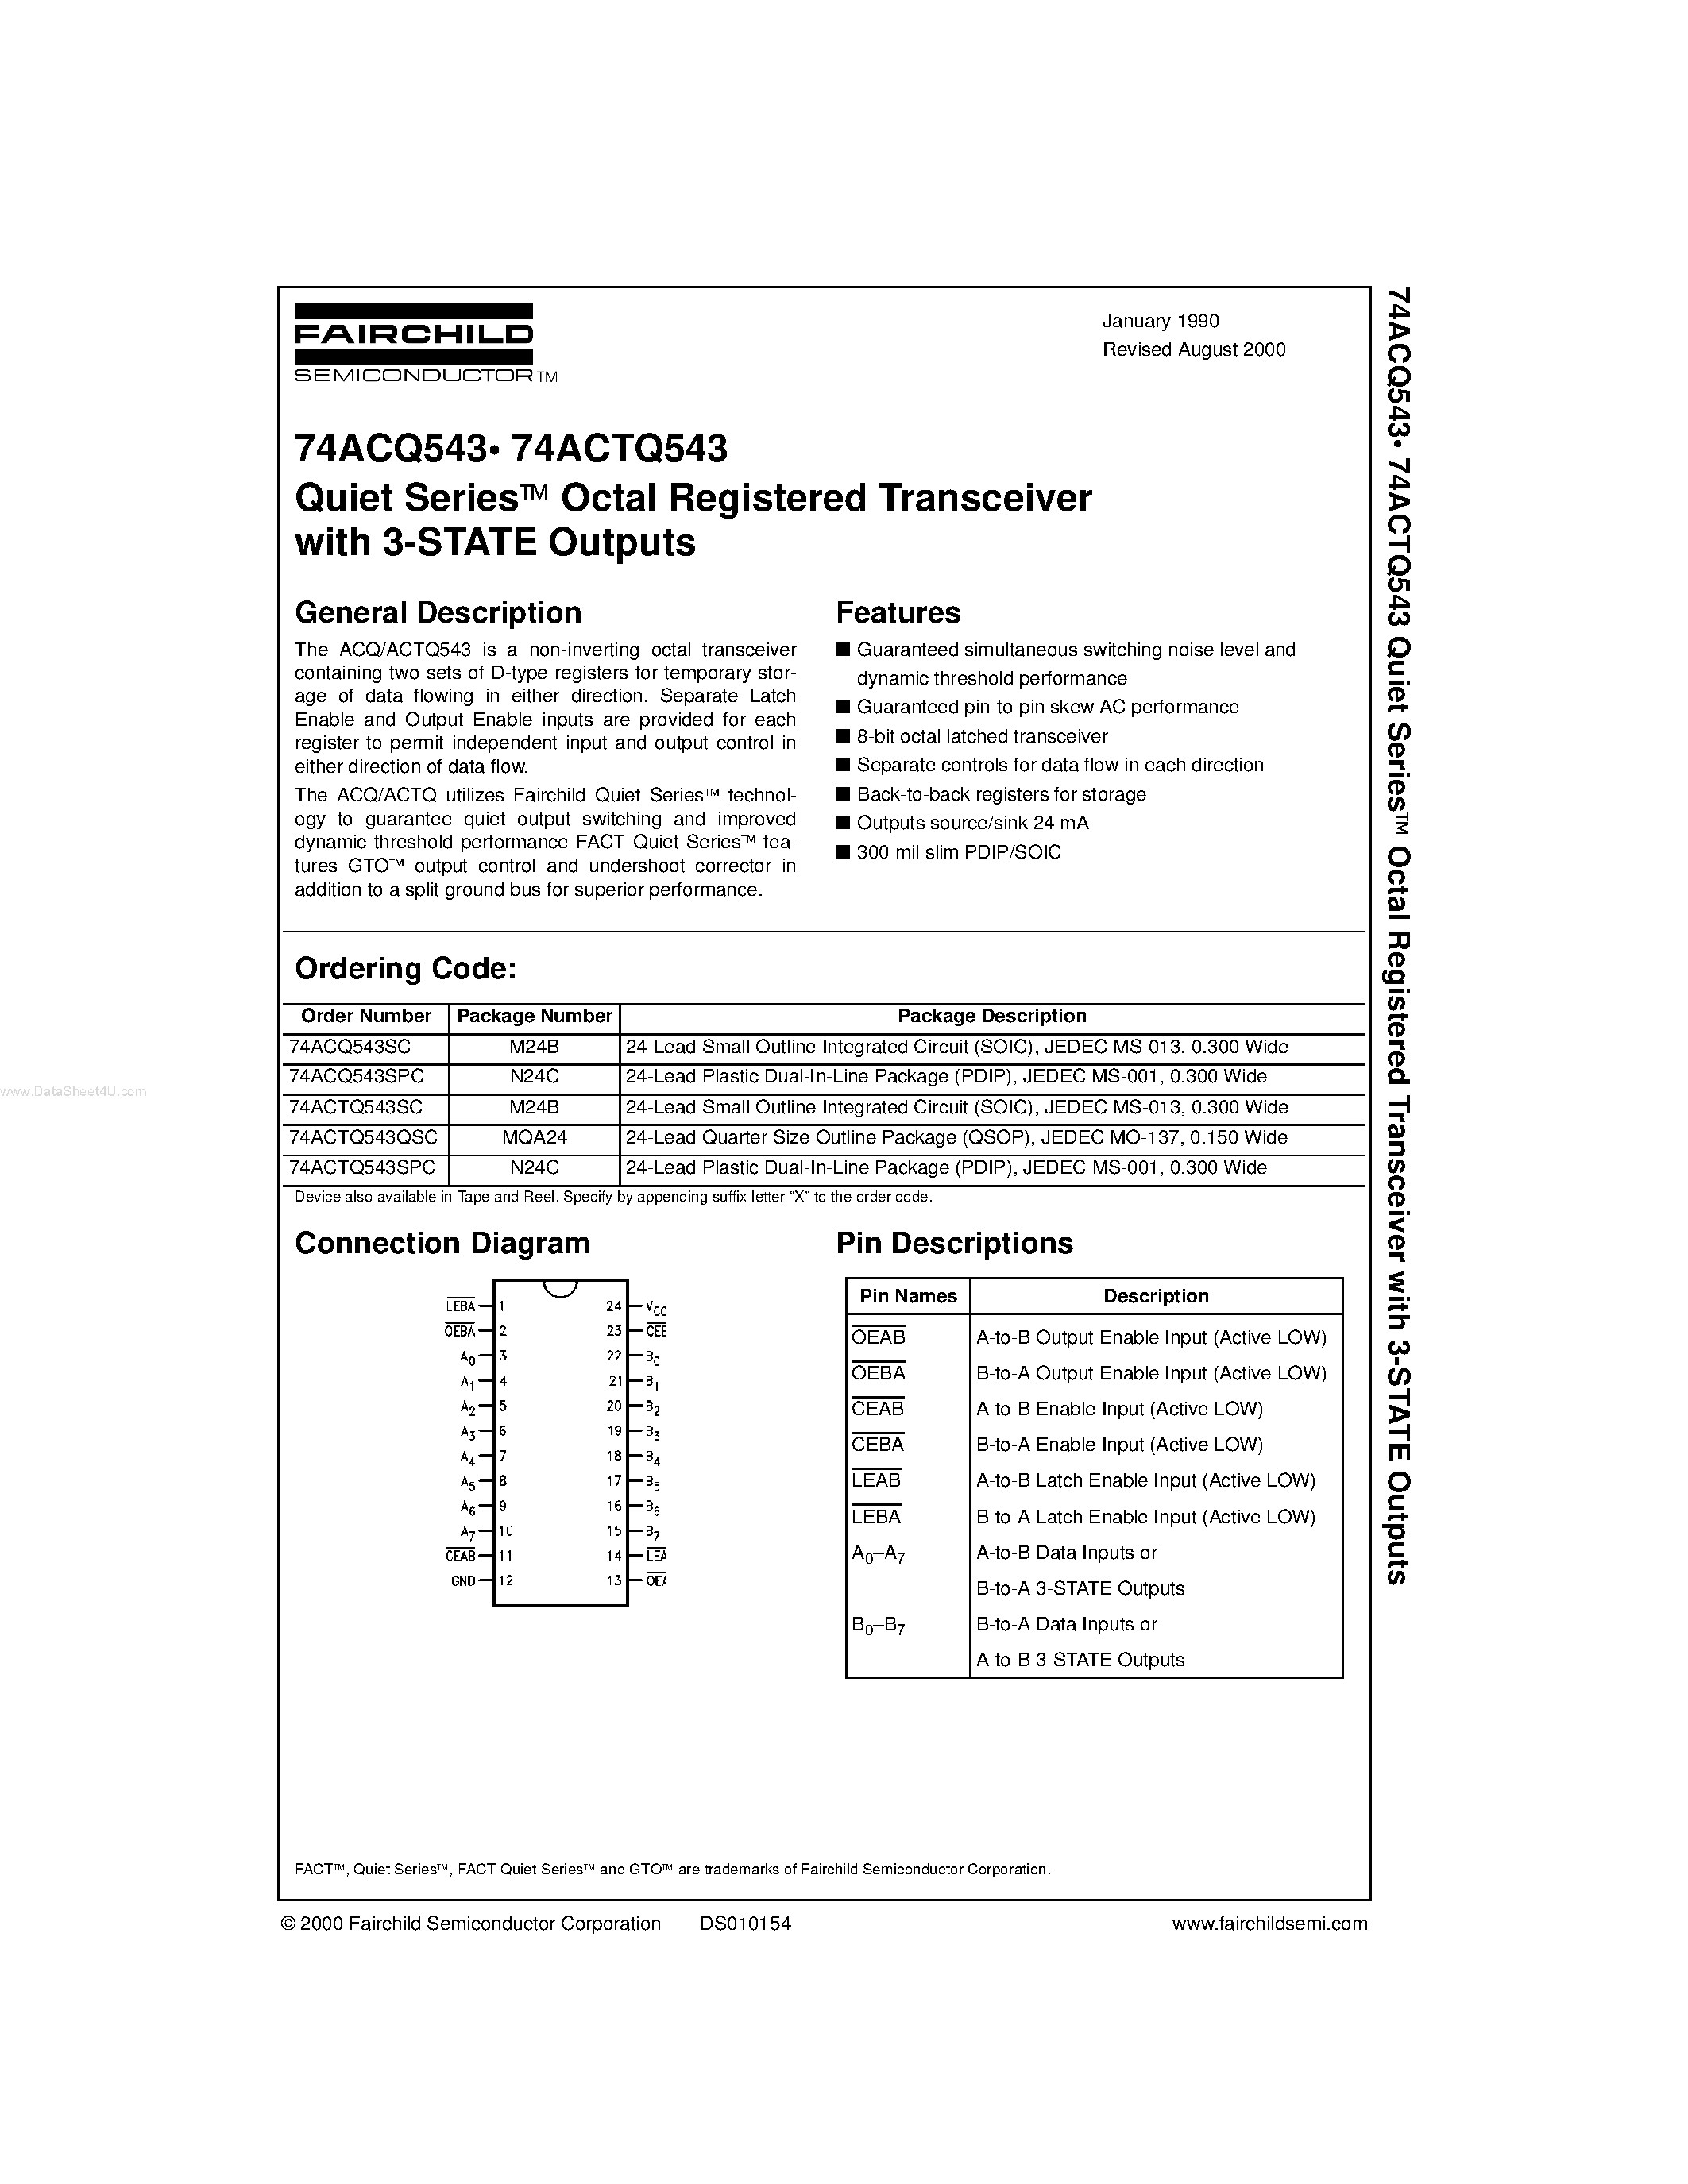 Datasheet 74ACQ543SC - Quiet Series Octal Registered Transceiver with 3-STATE Outputs page 1